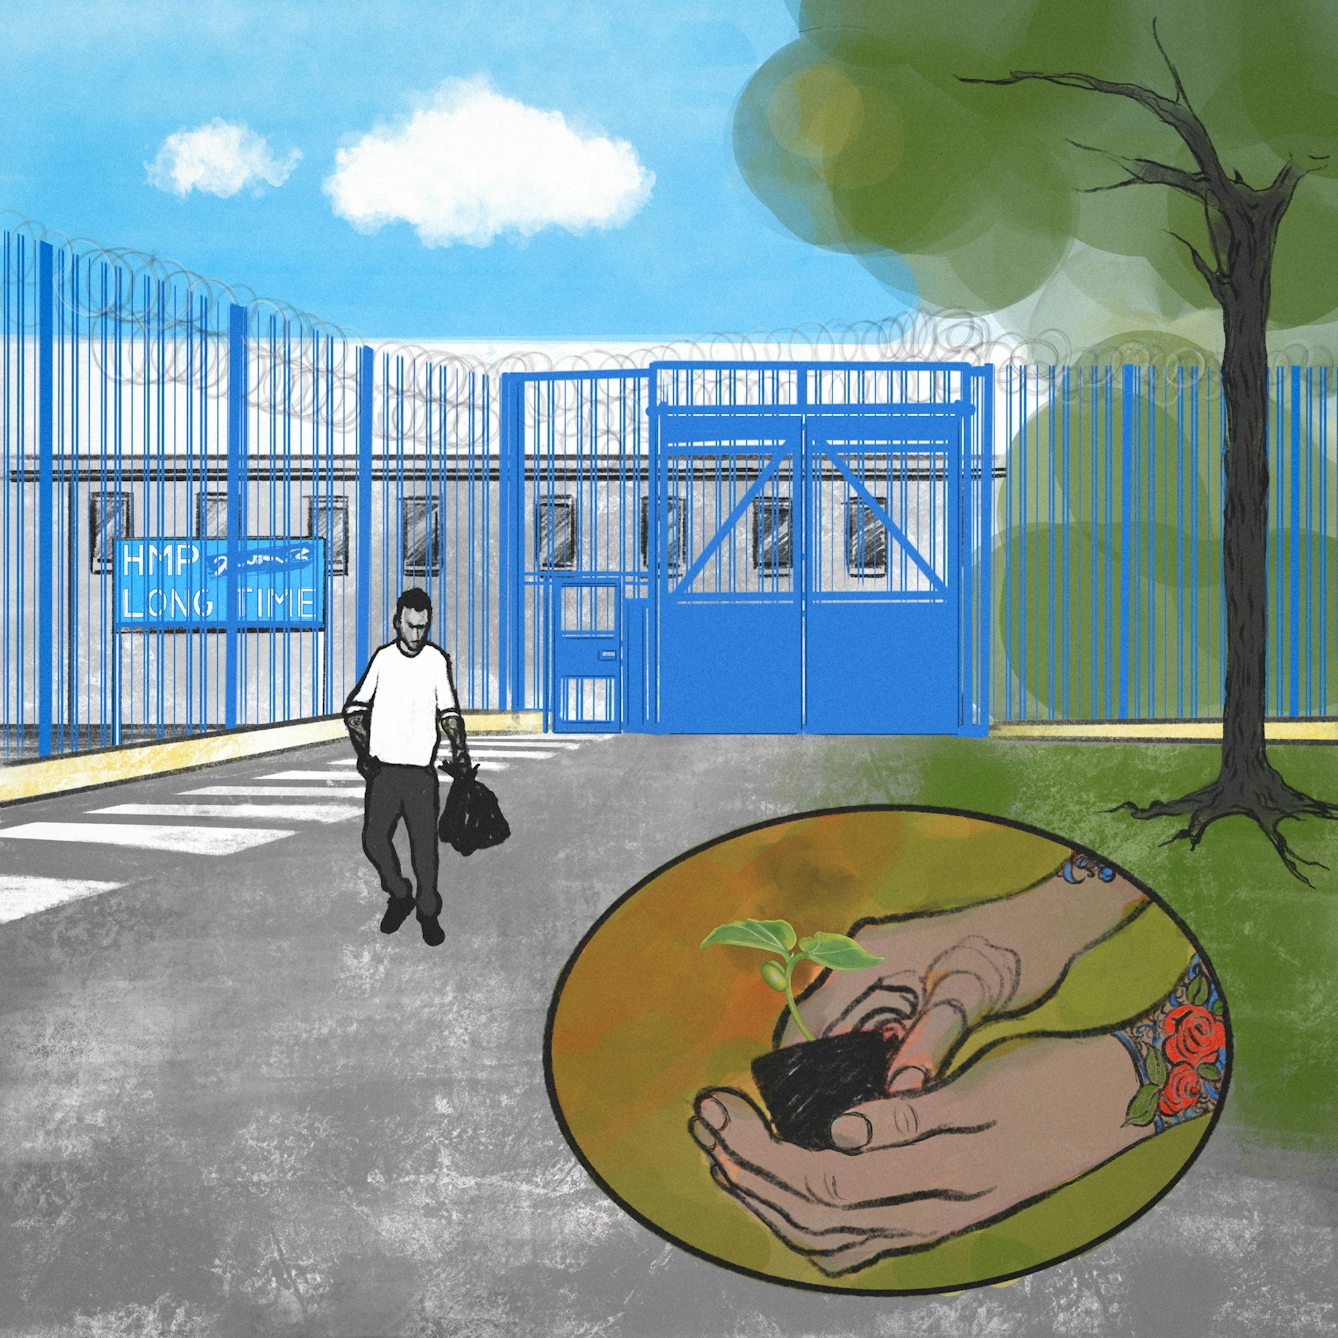 A digital illustration of a figure walking away from a prison gate on the left of frame, towards the green lawns and trees on the right of frame. In the bottom right there is an illustration of hands holding a small seedling ready to be planted, the person has tattooed arms showing blossoming flowers.